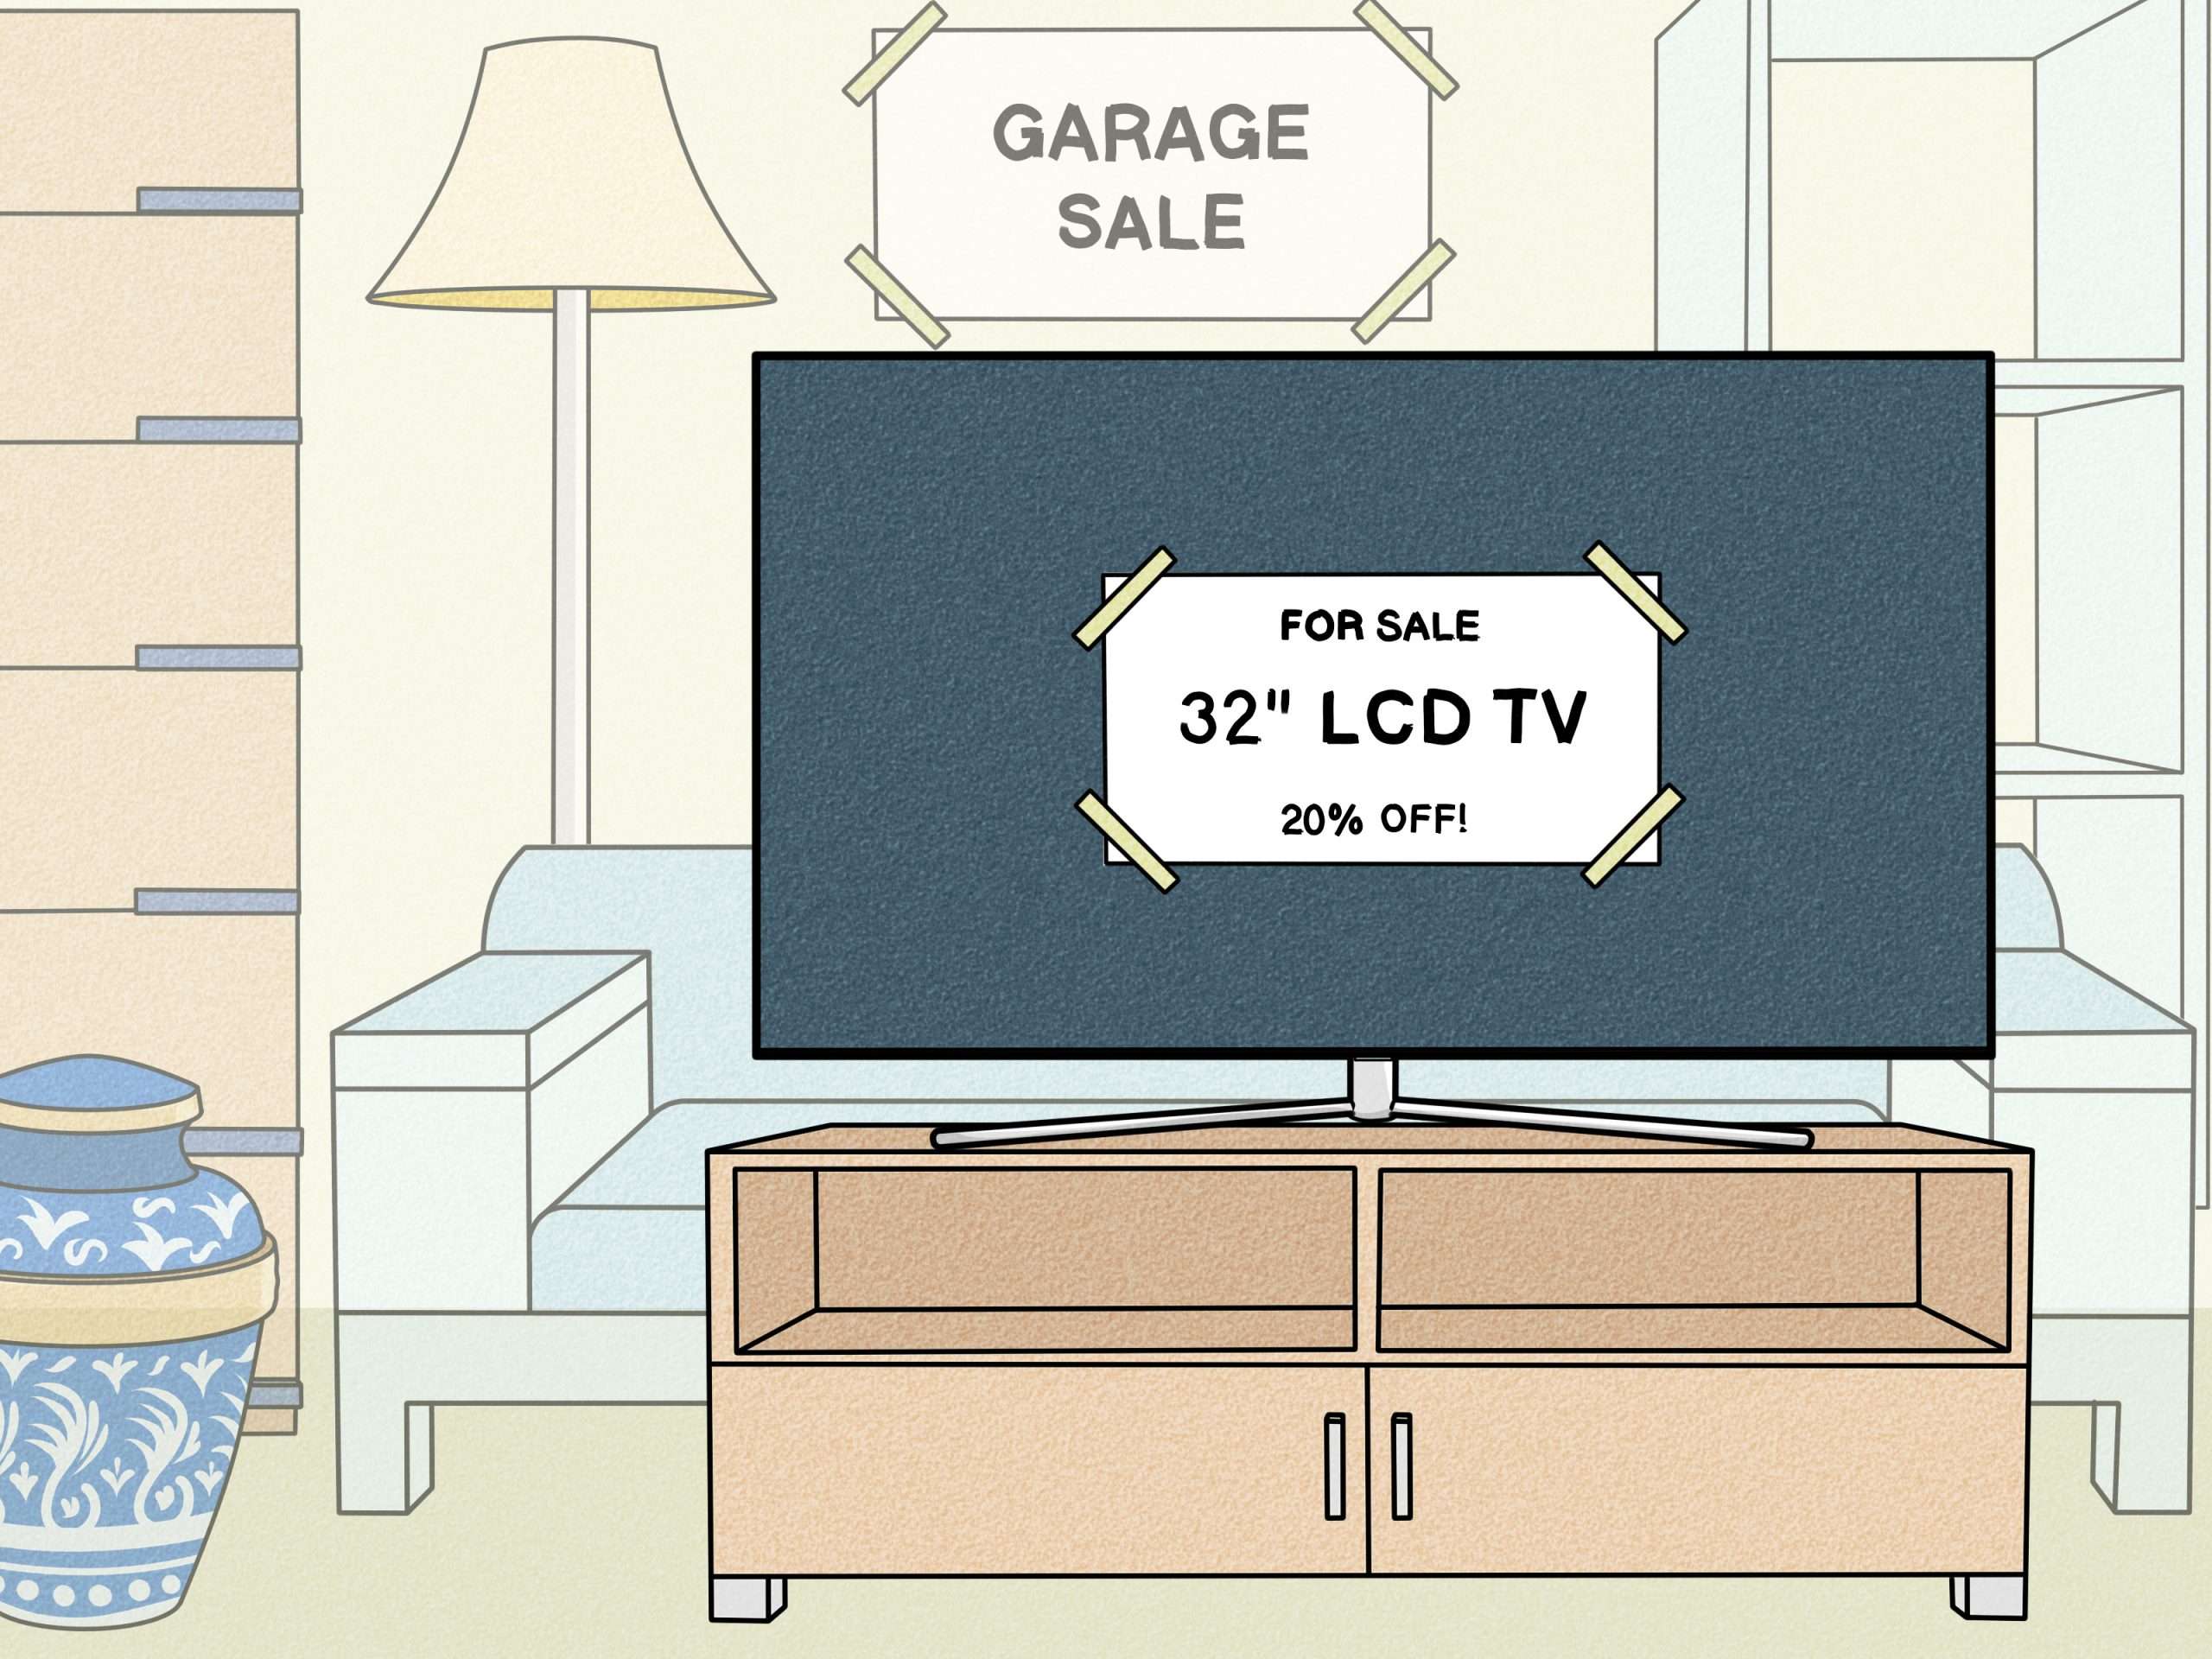 3 Ways to Dispose of Television Sets